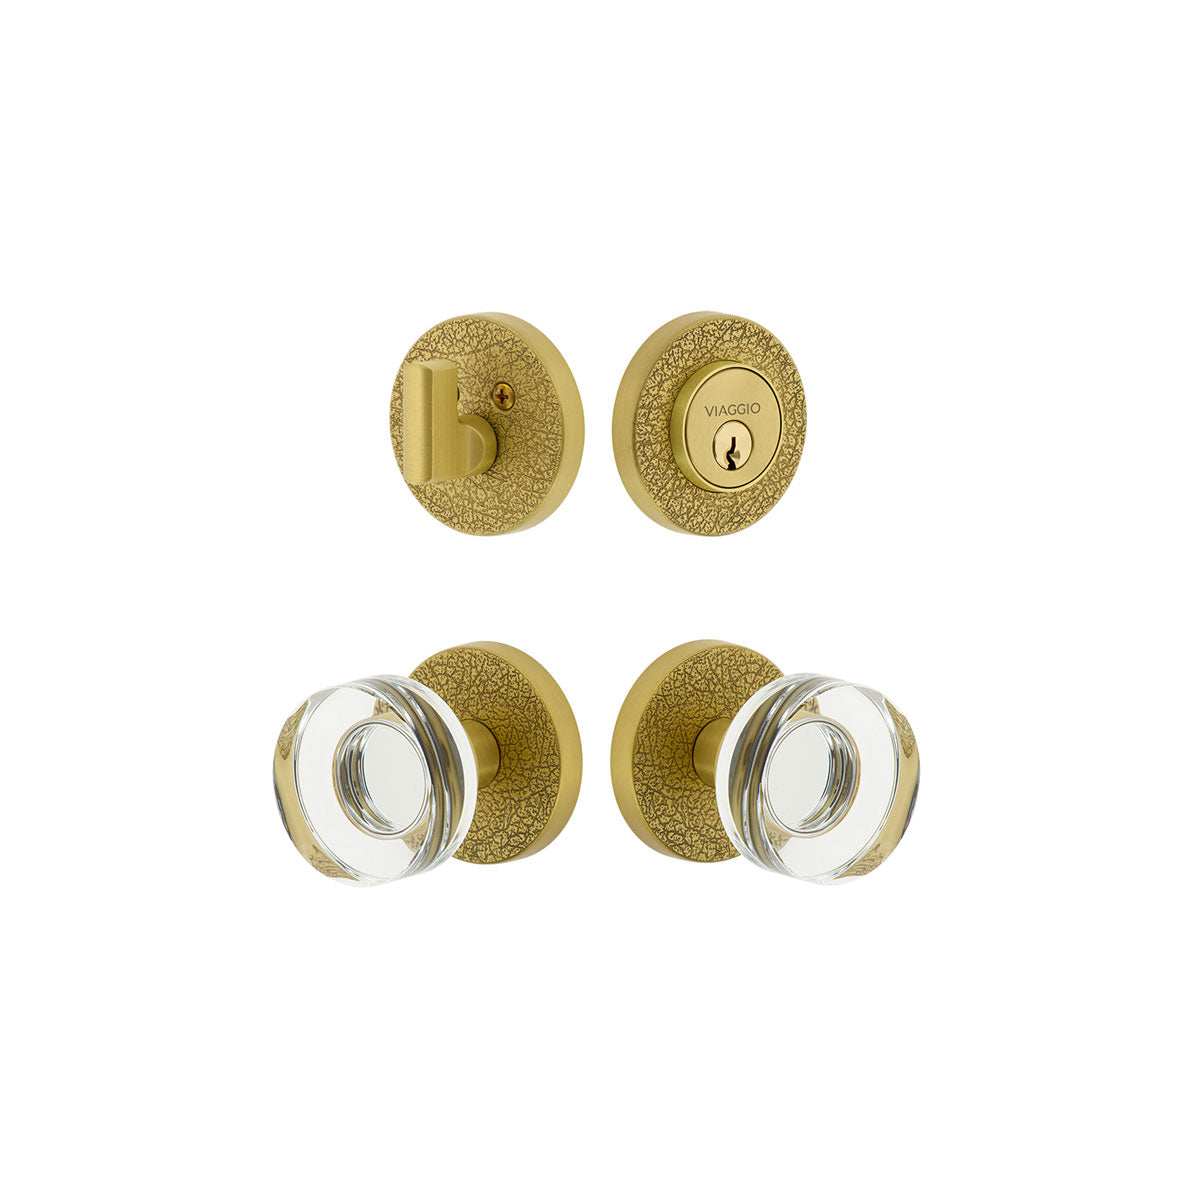 Circolo Leather Rosette Entry Set with Circolo Crystal Knob in Satin Brass